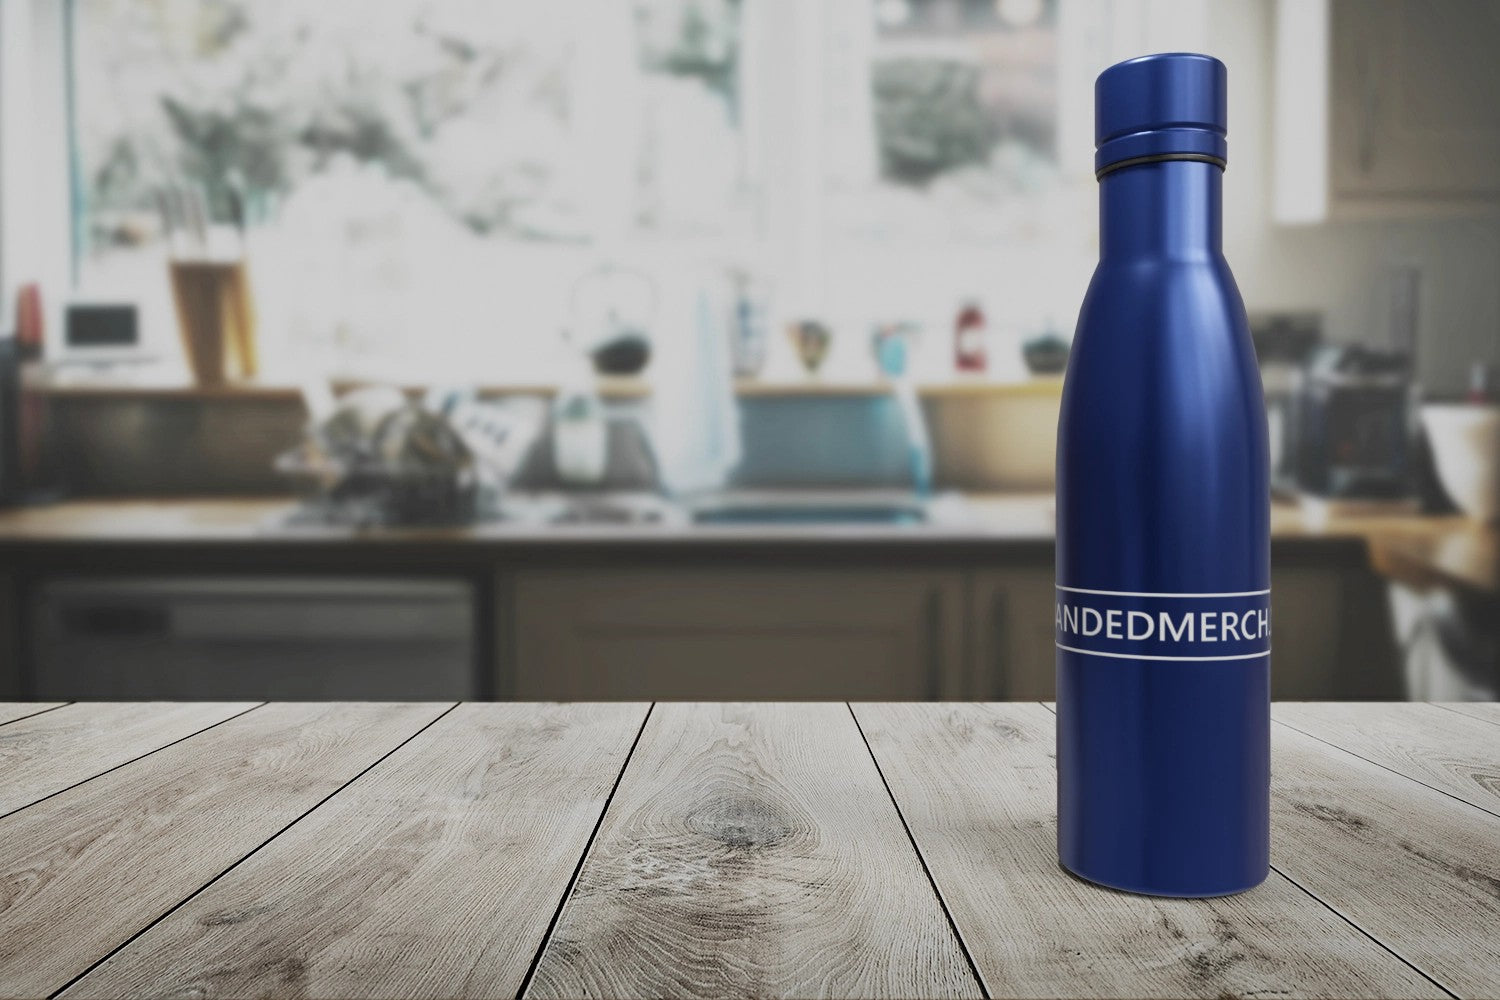 Copper Vacuum Insulated Water Bottle 500ml